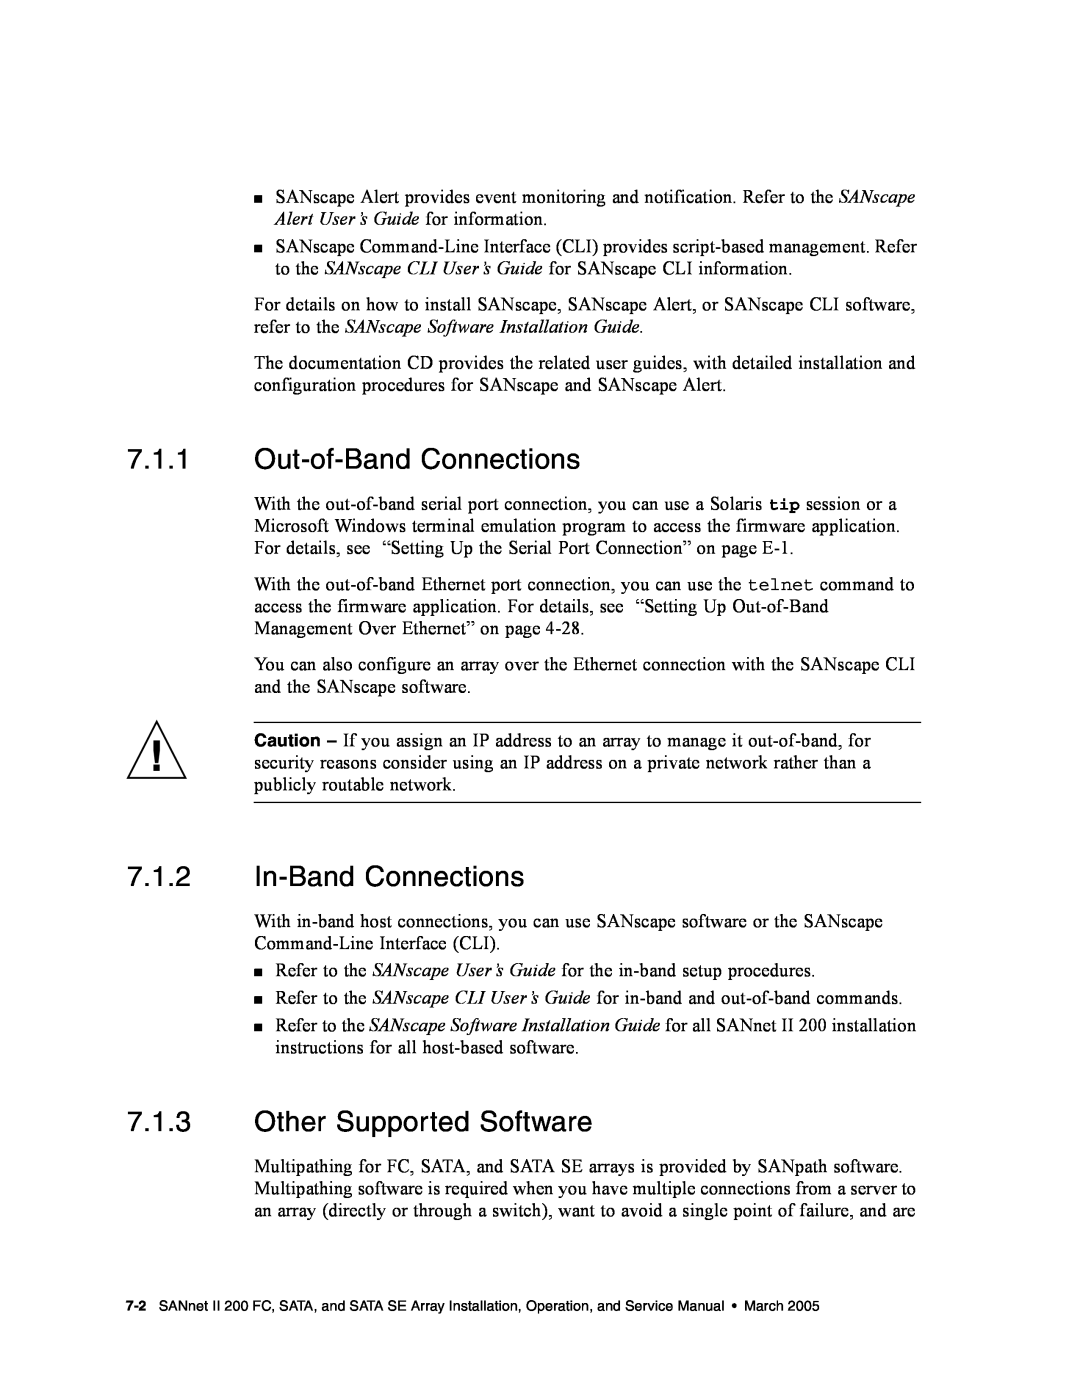 Dot Hill Systems II 200 FC service manual Out-of-Band Connections, In-Band Connections, Other Supported Software 